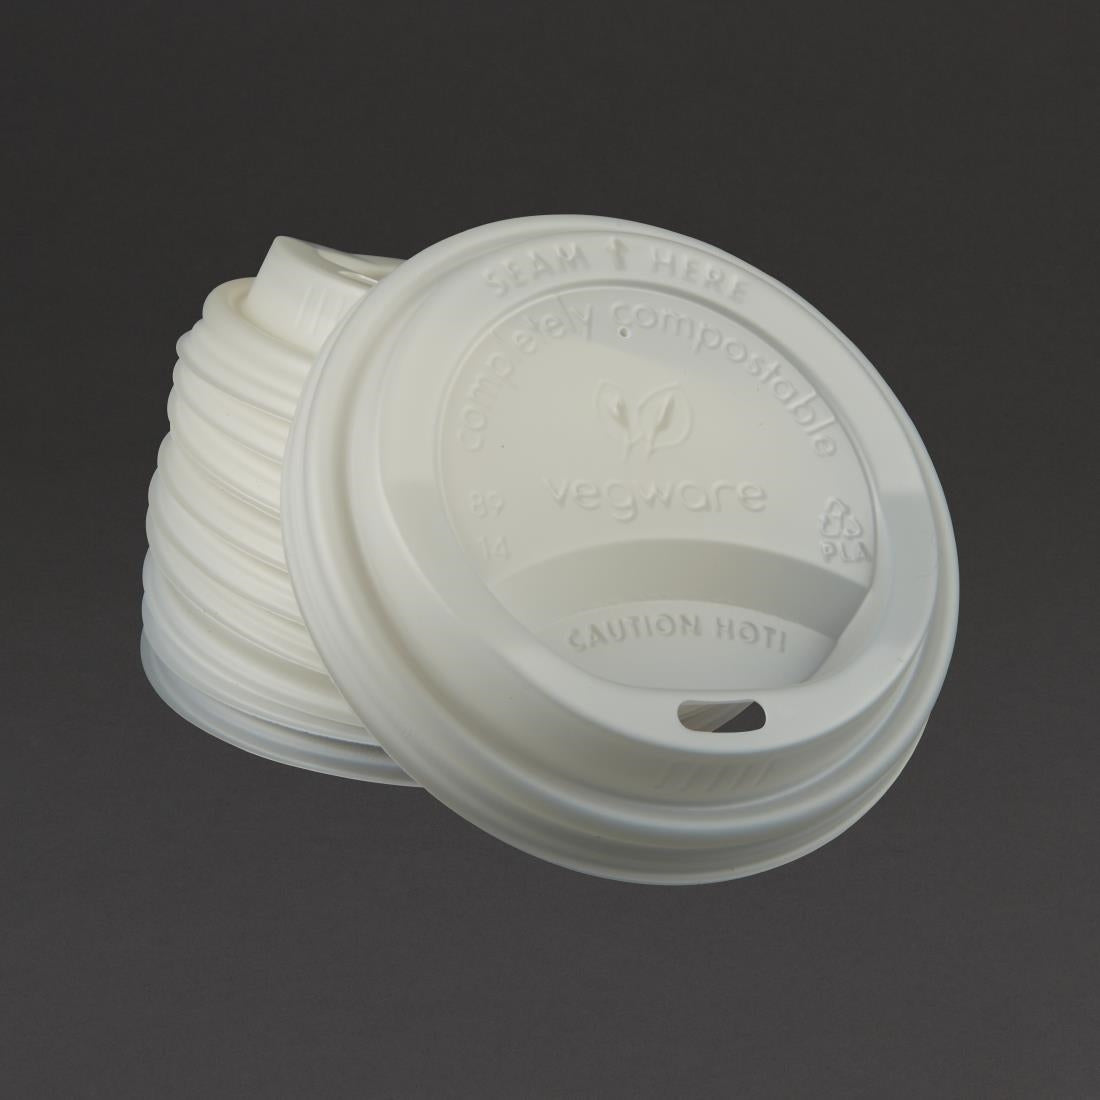 GH023 Compostable Coffee Cup Lids 340ml / 12oz and 455ml / 16oz (Pack of 1000) JD Catering Equipment Solutions Ltd